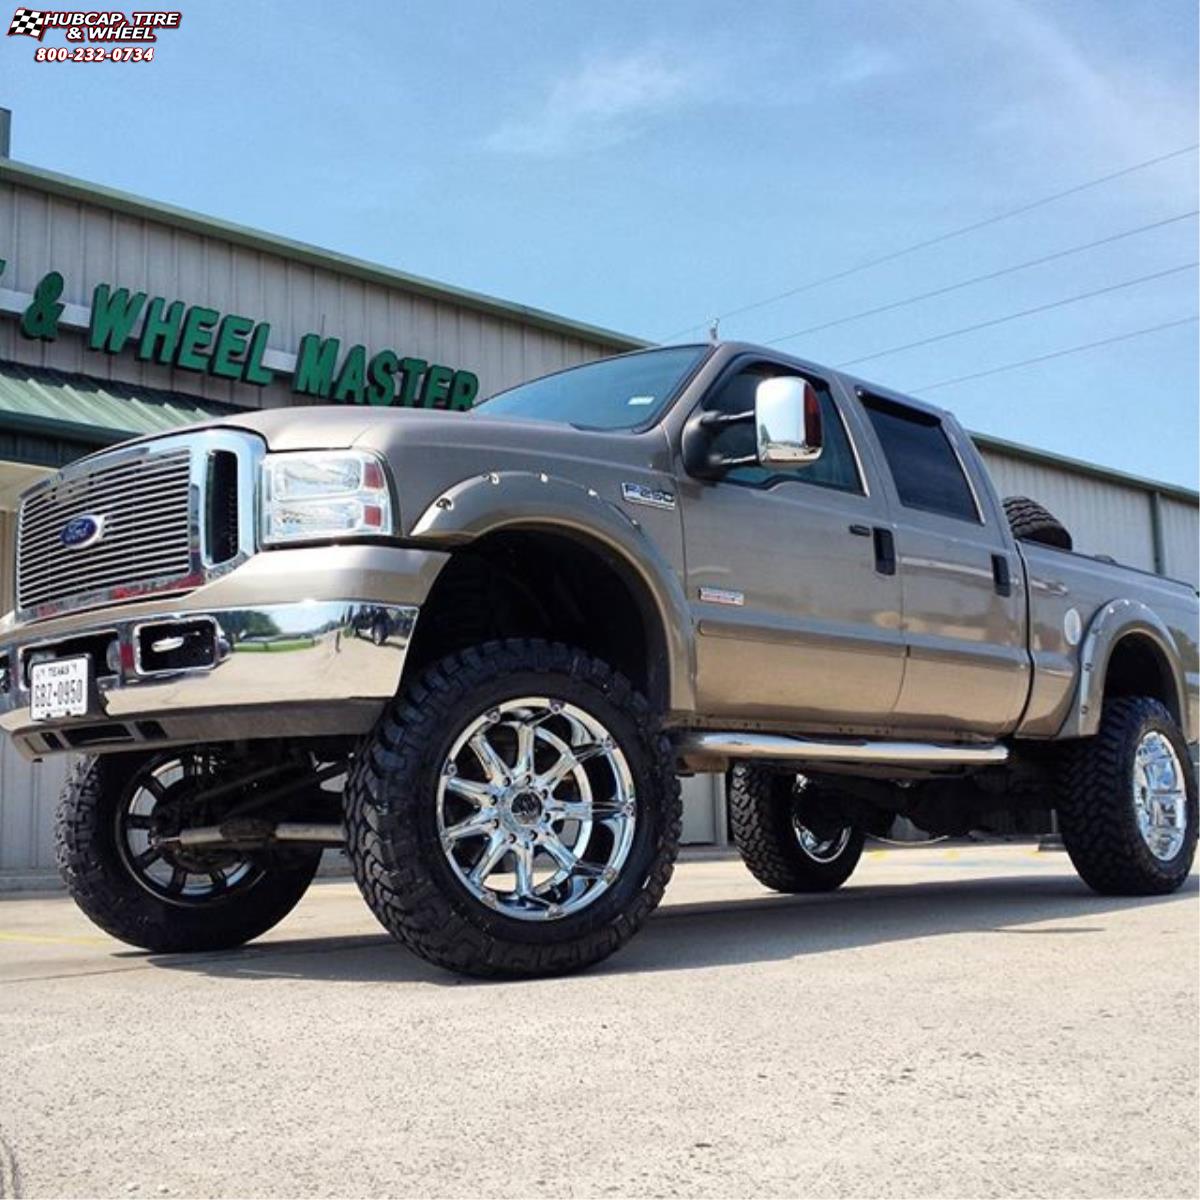 vehicle gallery/ford f 250 xd series xd779 badlands x  Chrome wheels and rims